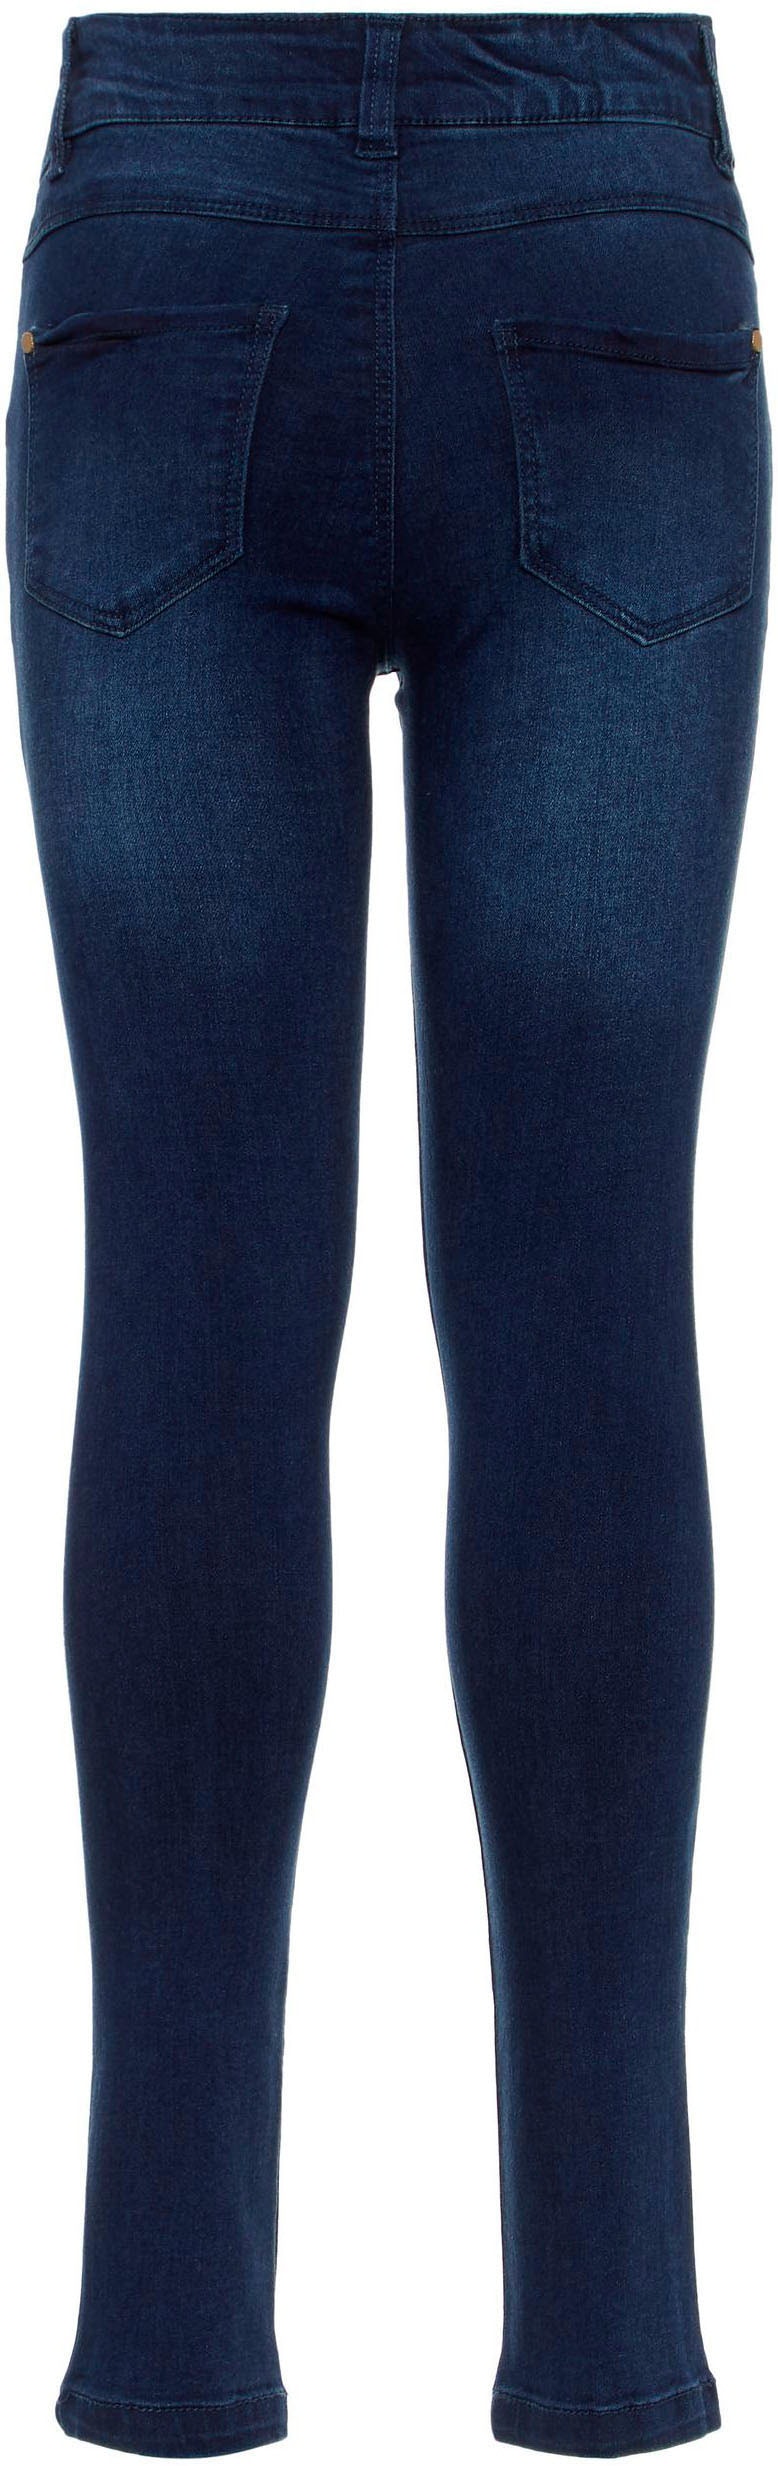 OTTO Online Stretch-Jeans in im It Name Passform schmaler Shop »NKFPOLLY«,